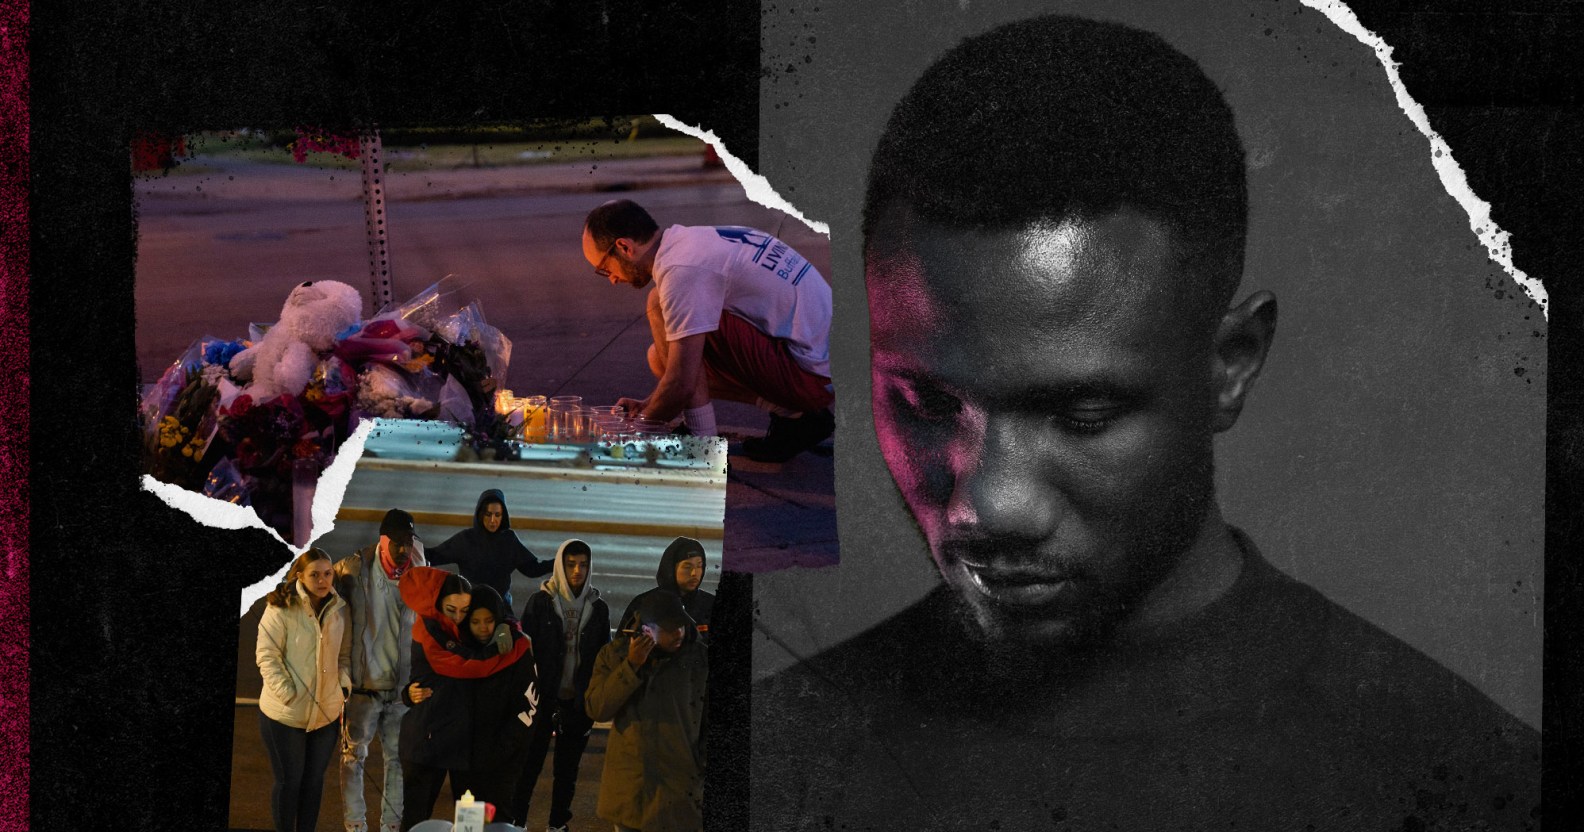 A composite image of a man looking sadly toward the floor next to images of hate crime